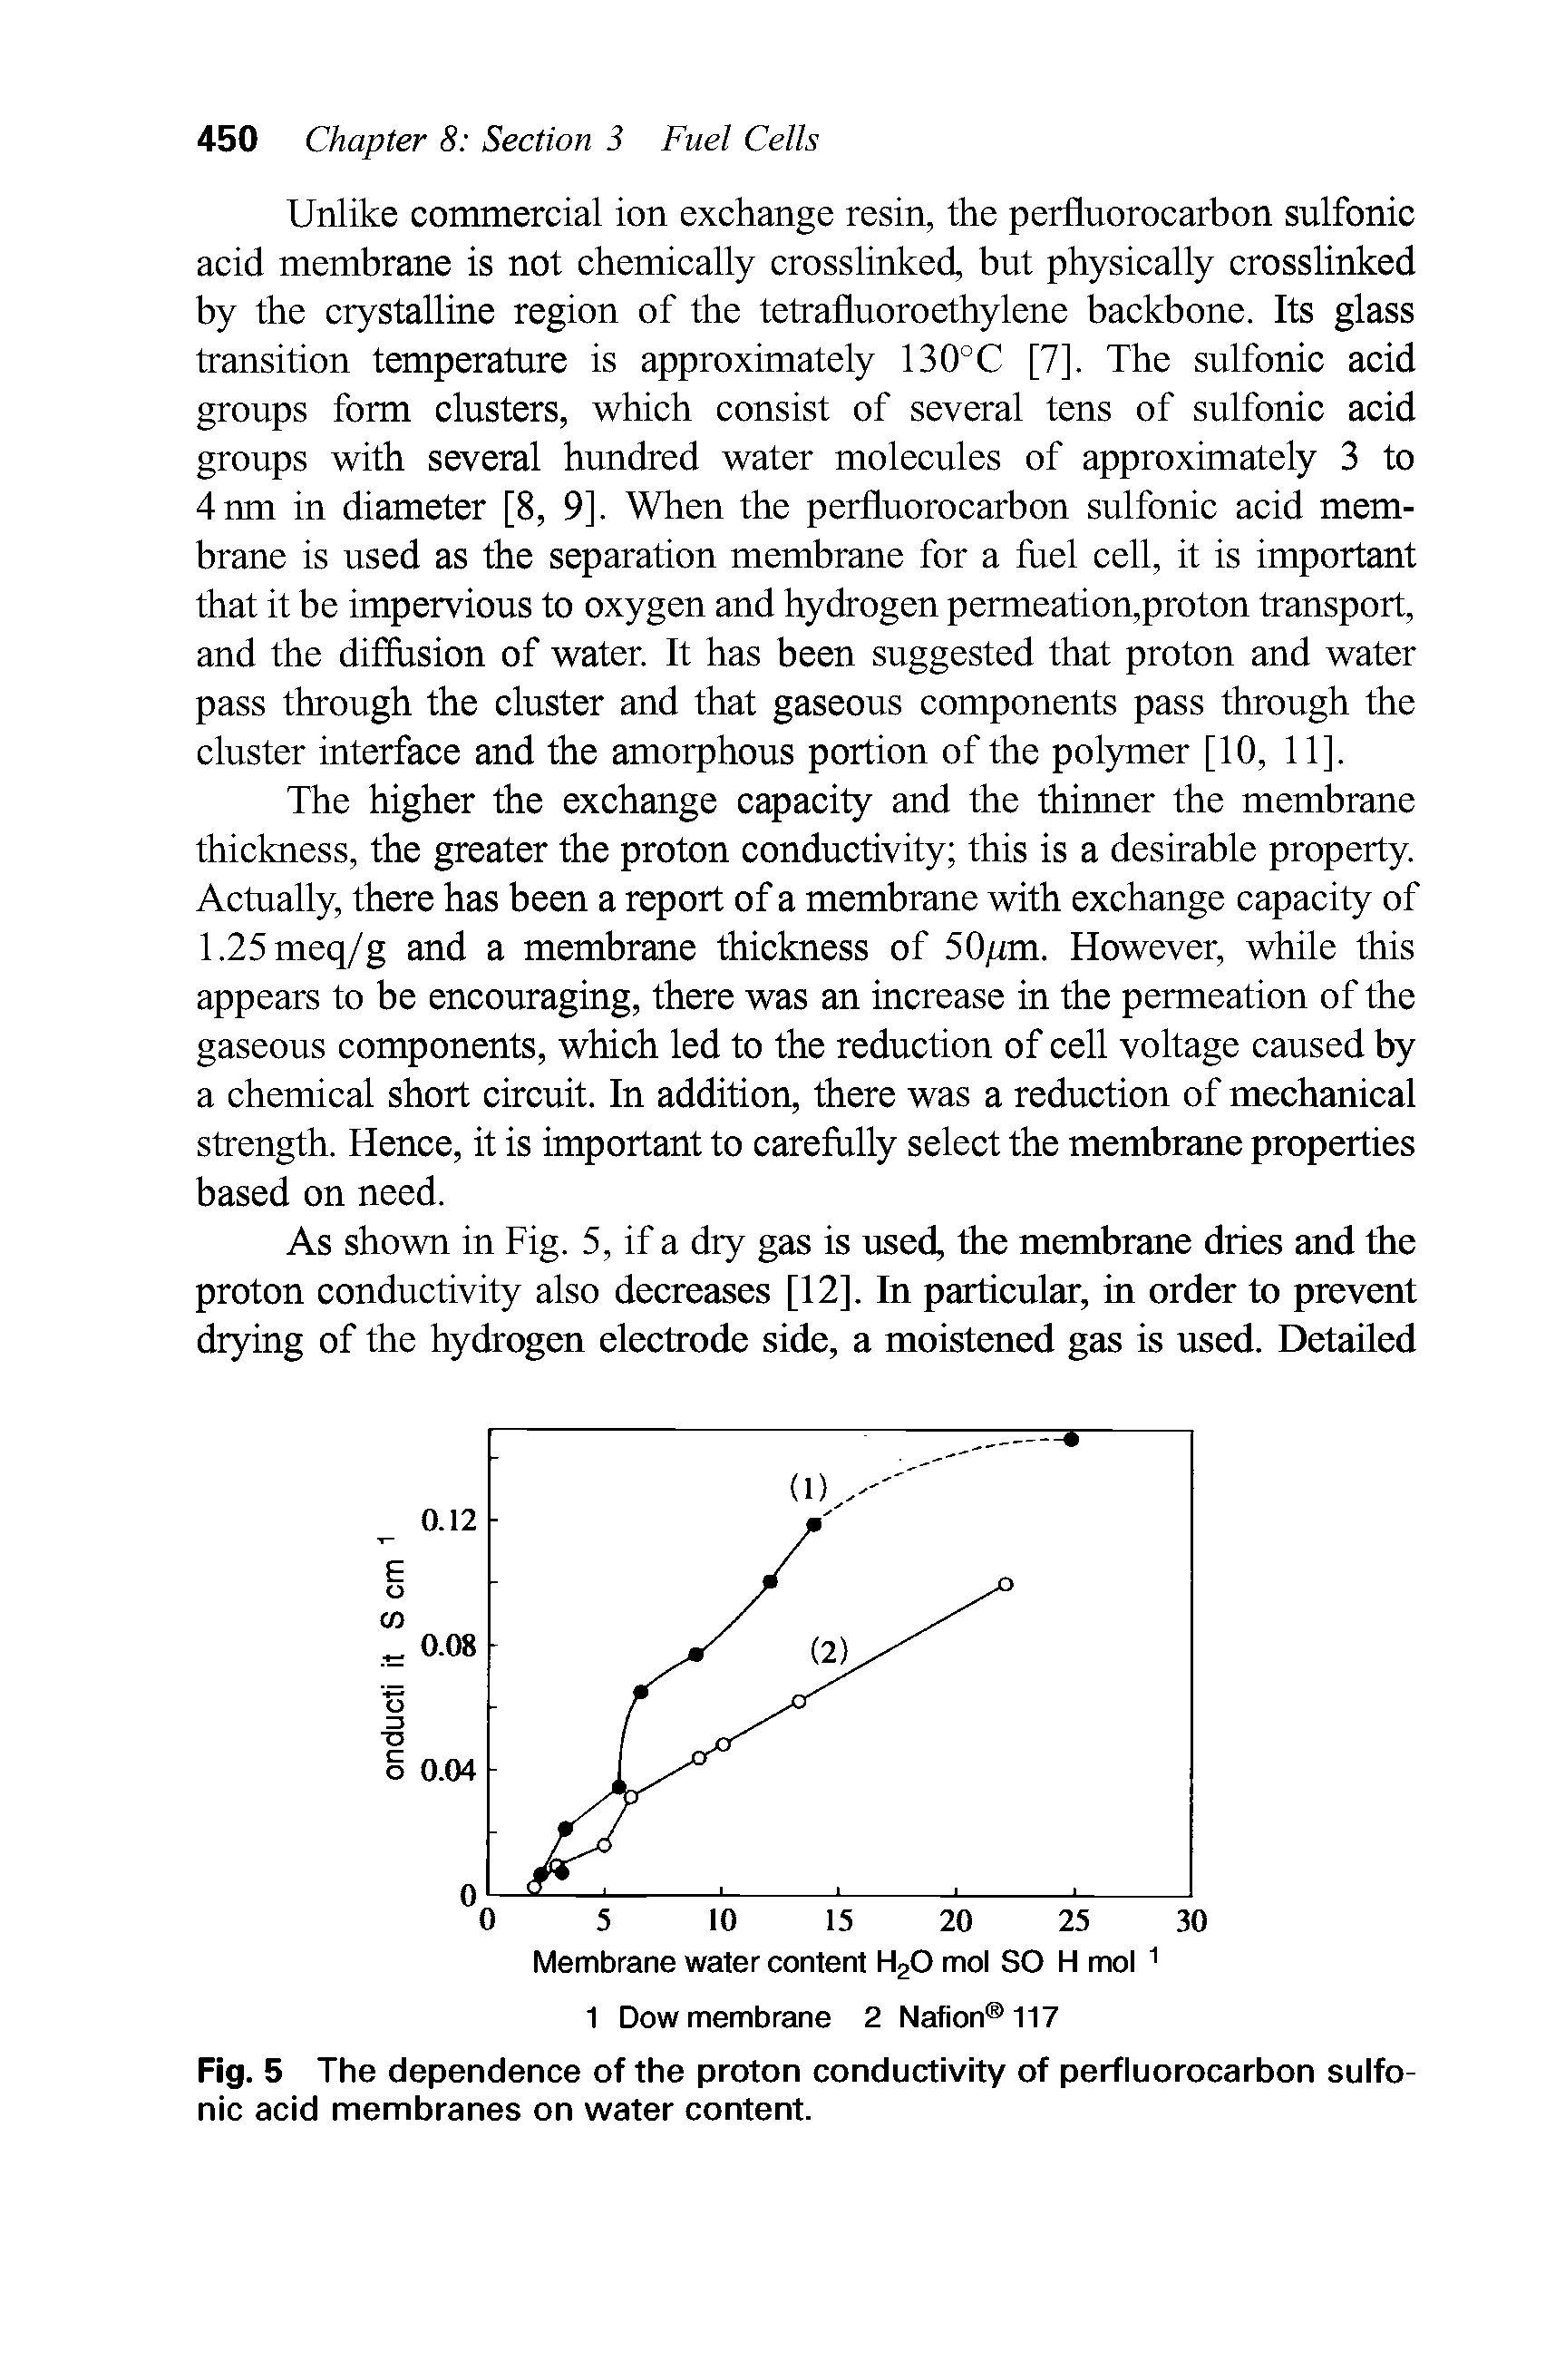 Fig. 5 The dependence of the proton conductivity of perfluorocarbon sulfonic acid membranes on water content.